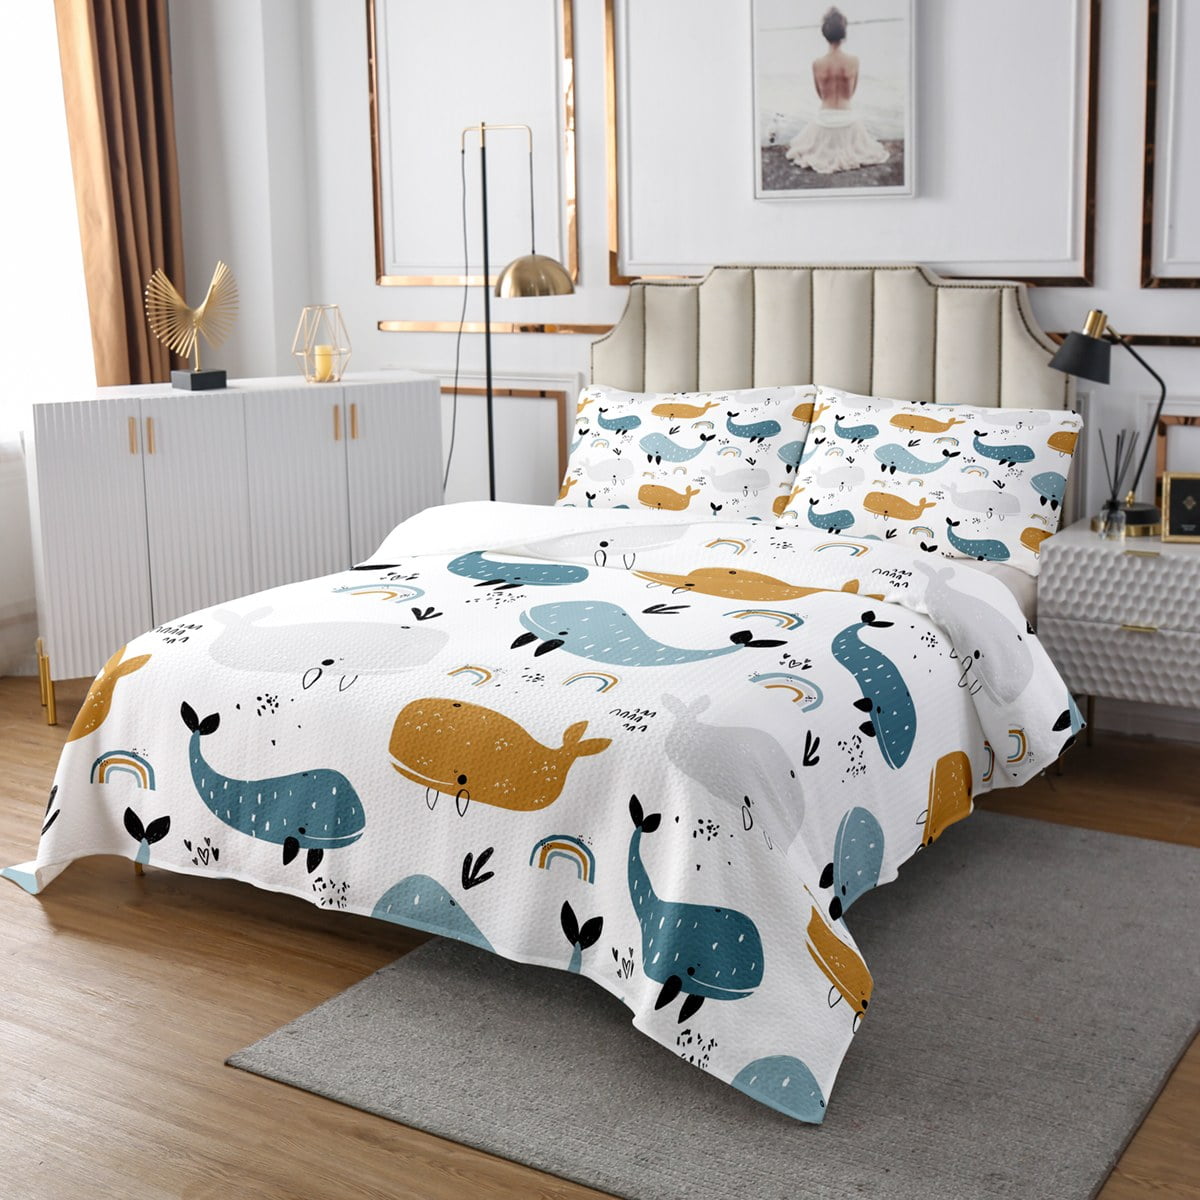  Castle Fairy Hunt Fish Bedding Set Twin Size,Farmhouse Wooden  Board Duvet Cover for Kids Boys Bed Comforter Cover Set,Deer Bird Fish  Animal Hunting Bedding Quilt Cover Set Decorative 2 Pieces 